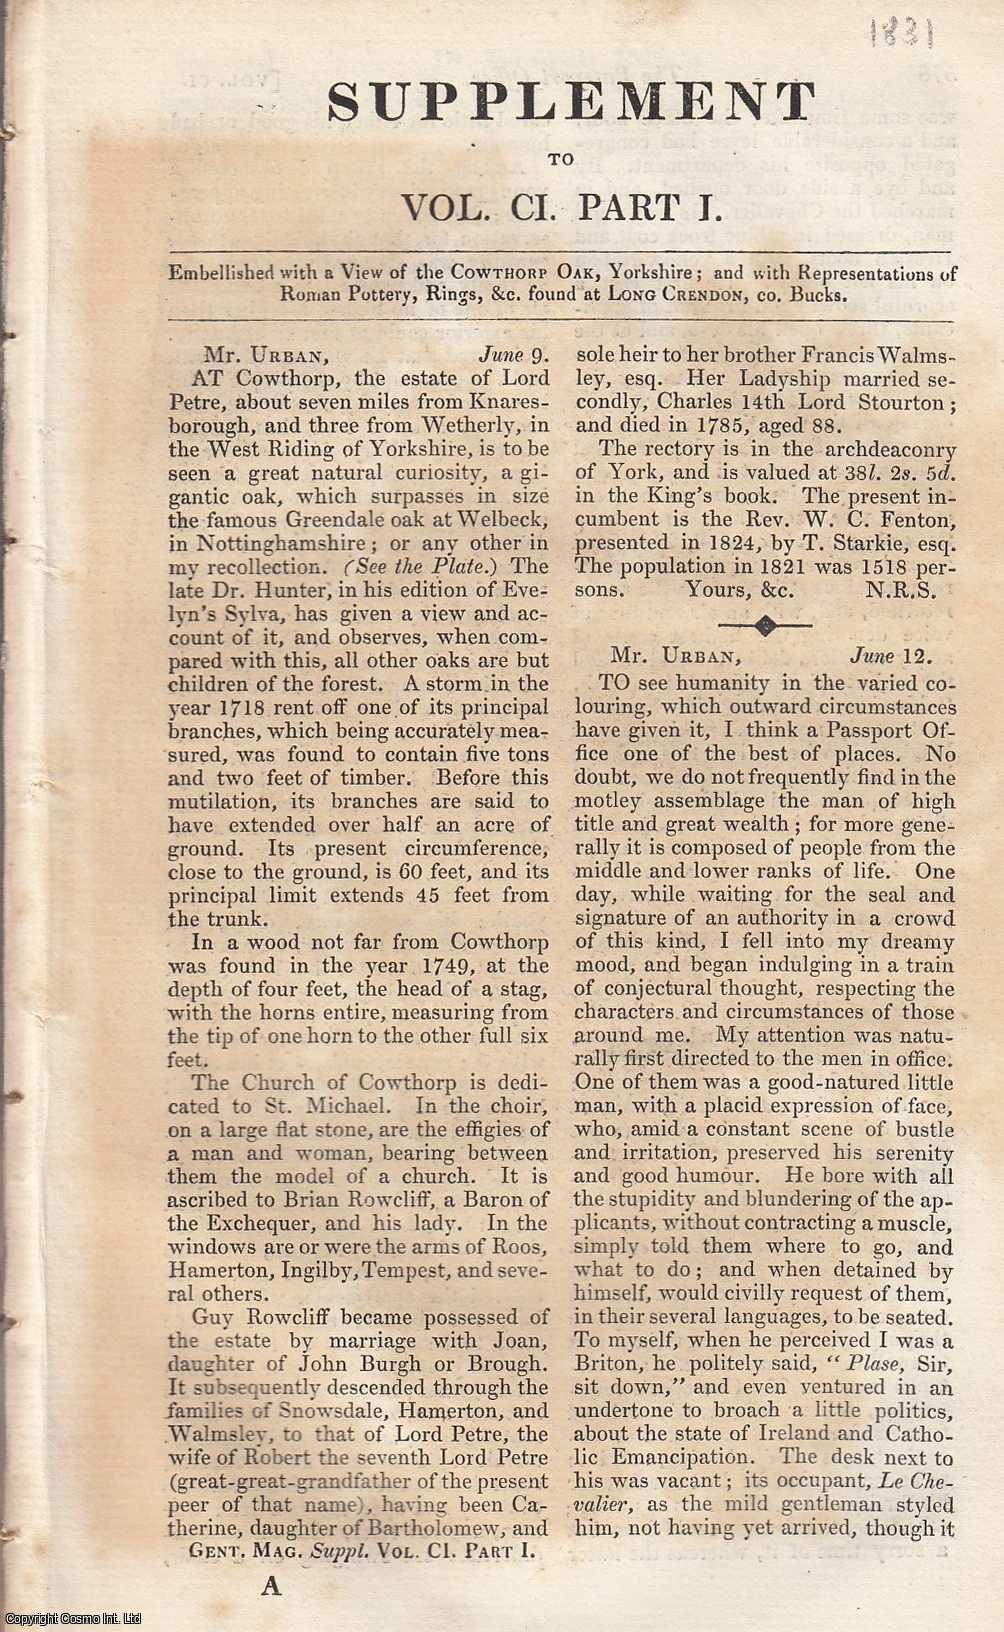 Sylvanus Urban - The Gentleman's Magazine for 1831, Supplement Part 1. Includes a three page article regarding the newly built St. Mary's Church, Shrewsbury. A original original monthly issue of the Gentleman's Magazine, 1831.